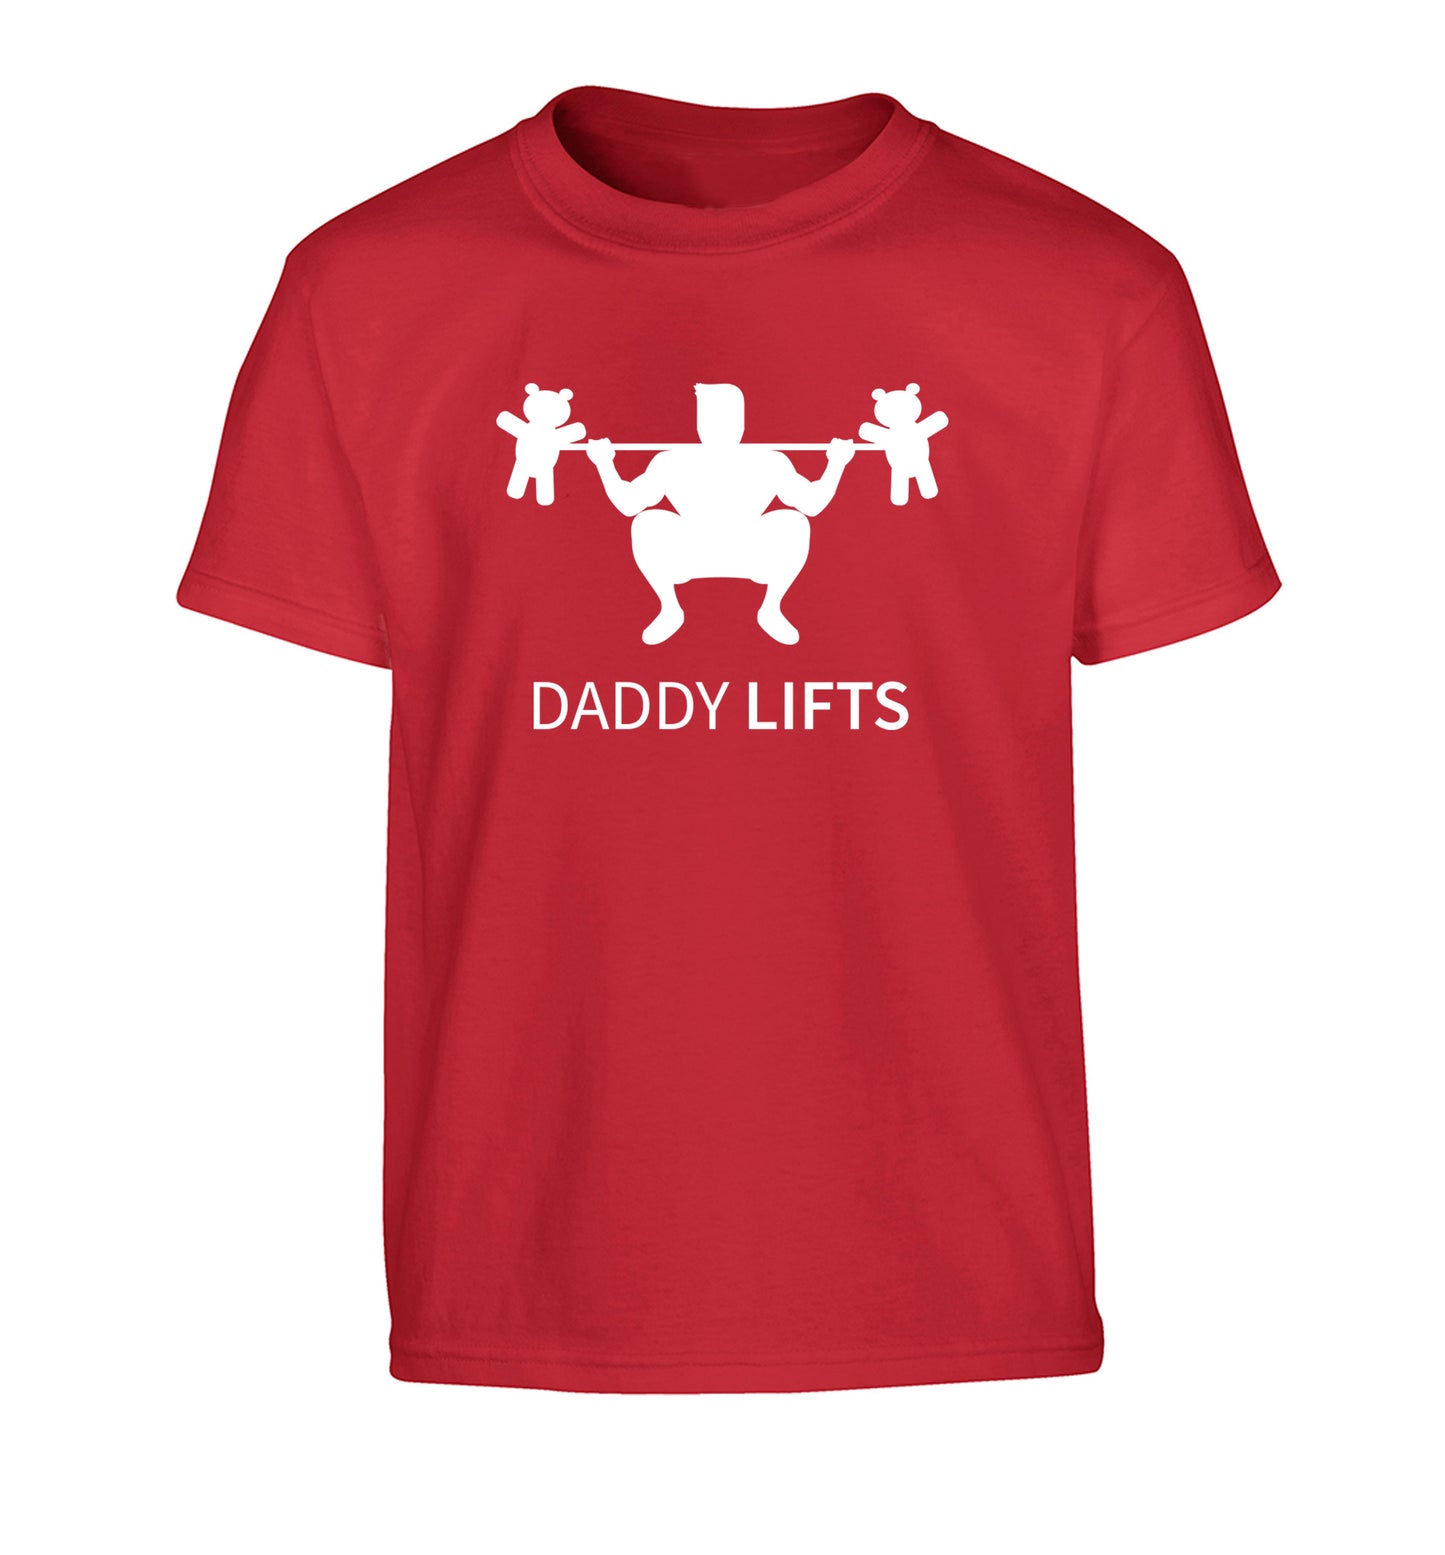 Daddy lifts Children's red Tshirt 12-13 Years